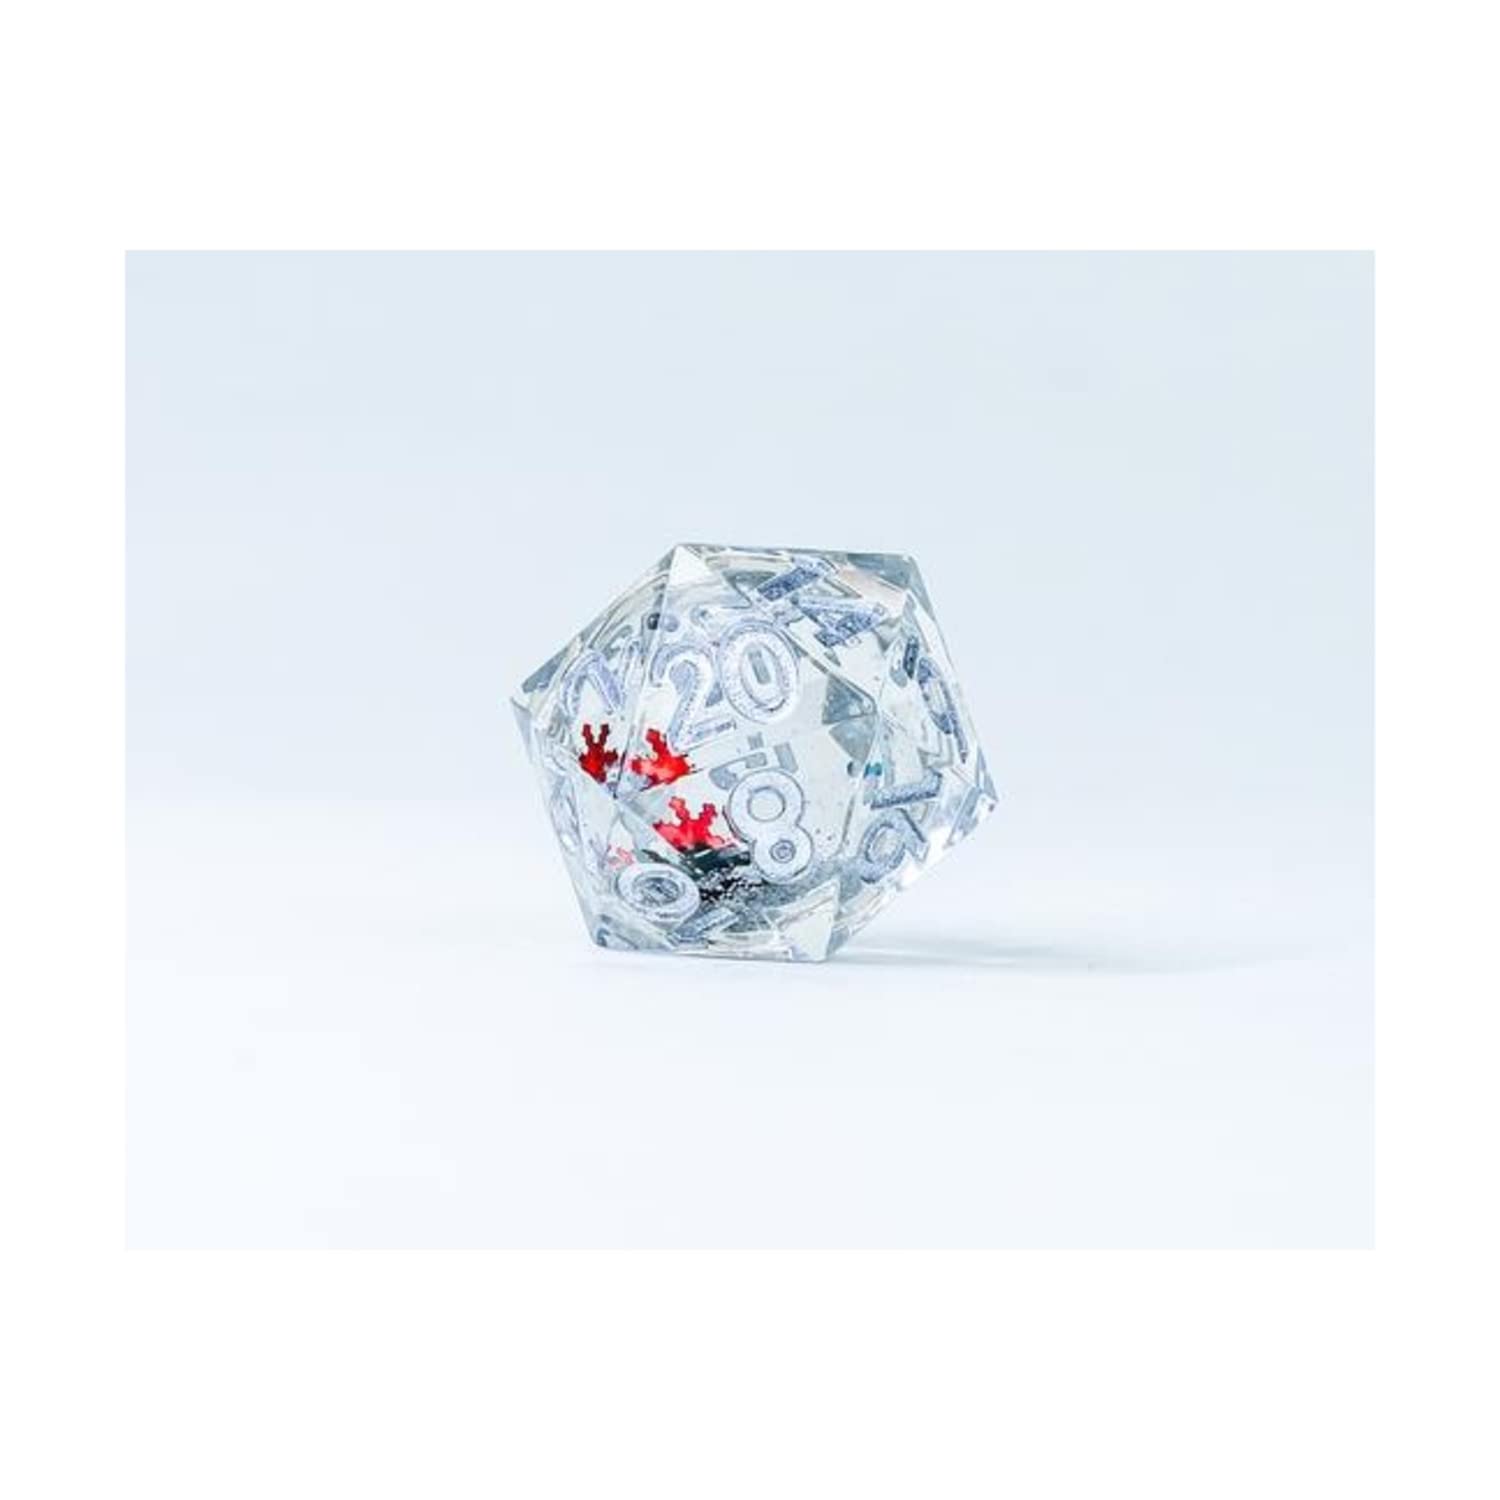 22mm Sharp Edged D20 - Silver Ink, Silver Glitter, Silver Green & Red Snowflakes - Lost City Toys